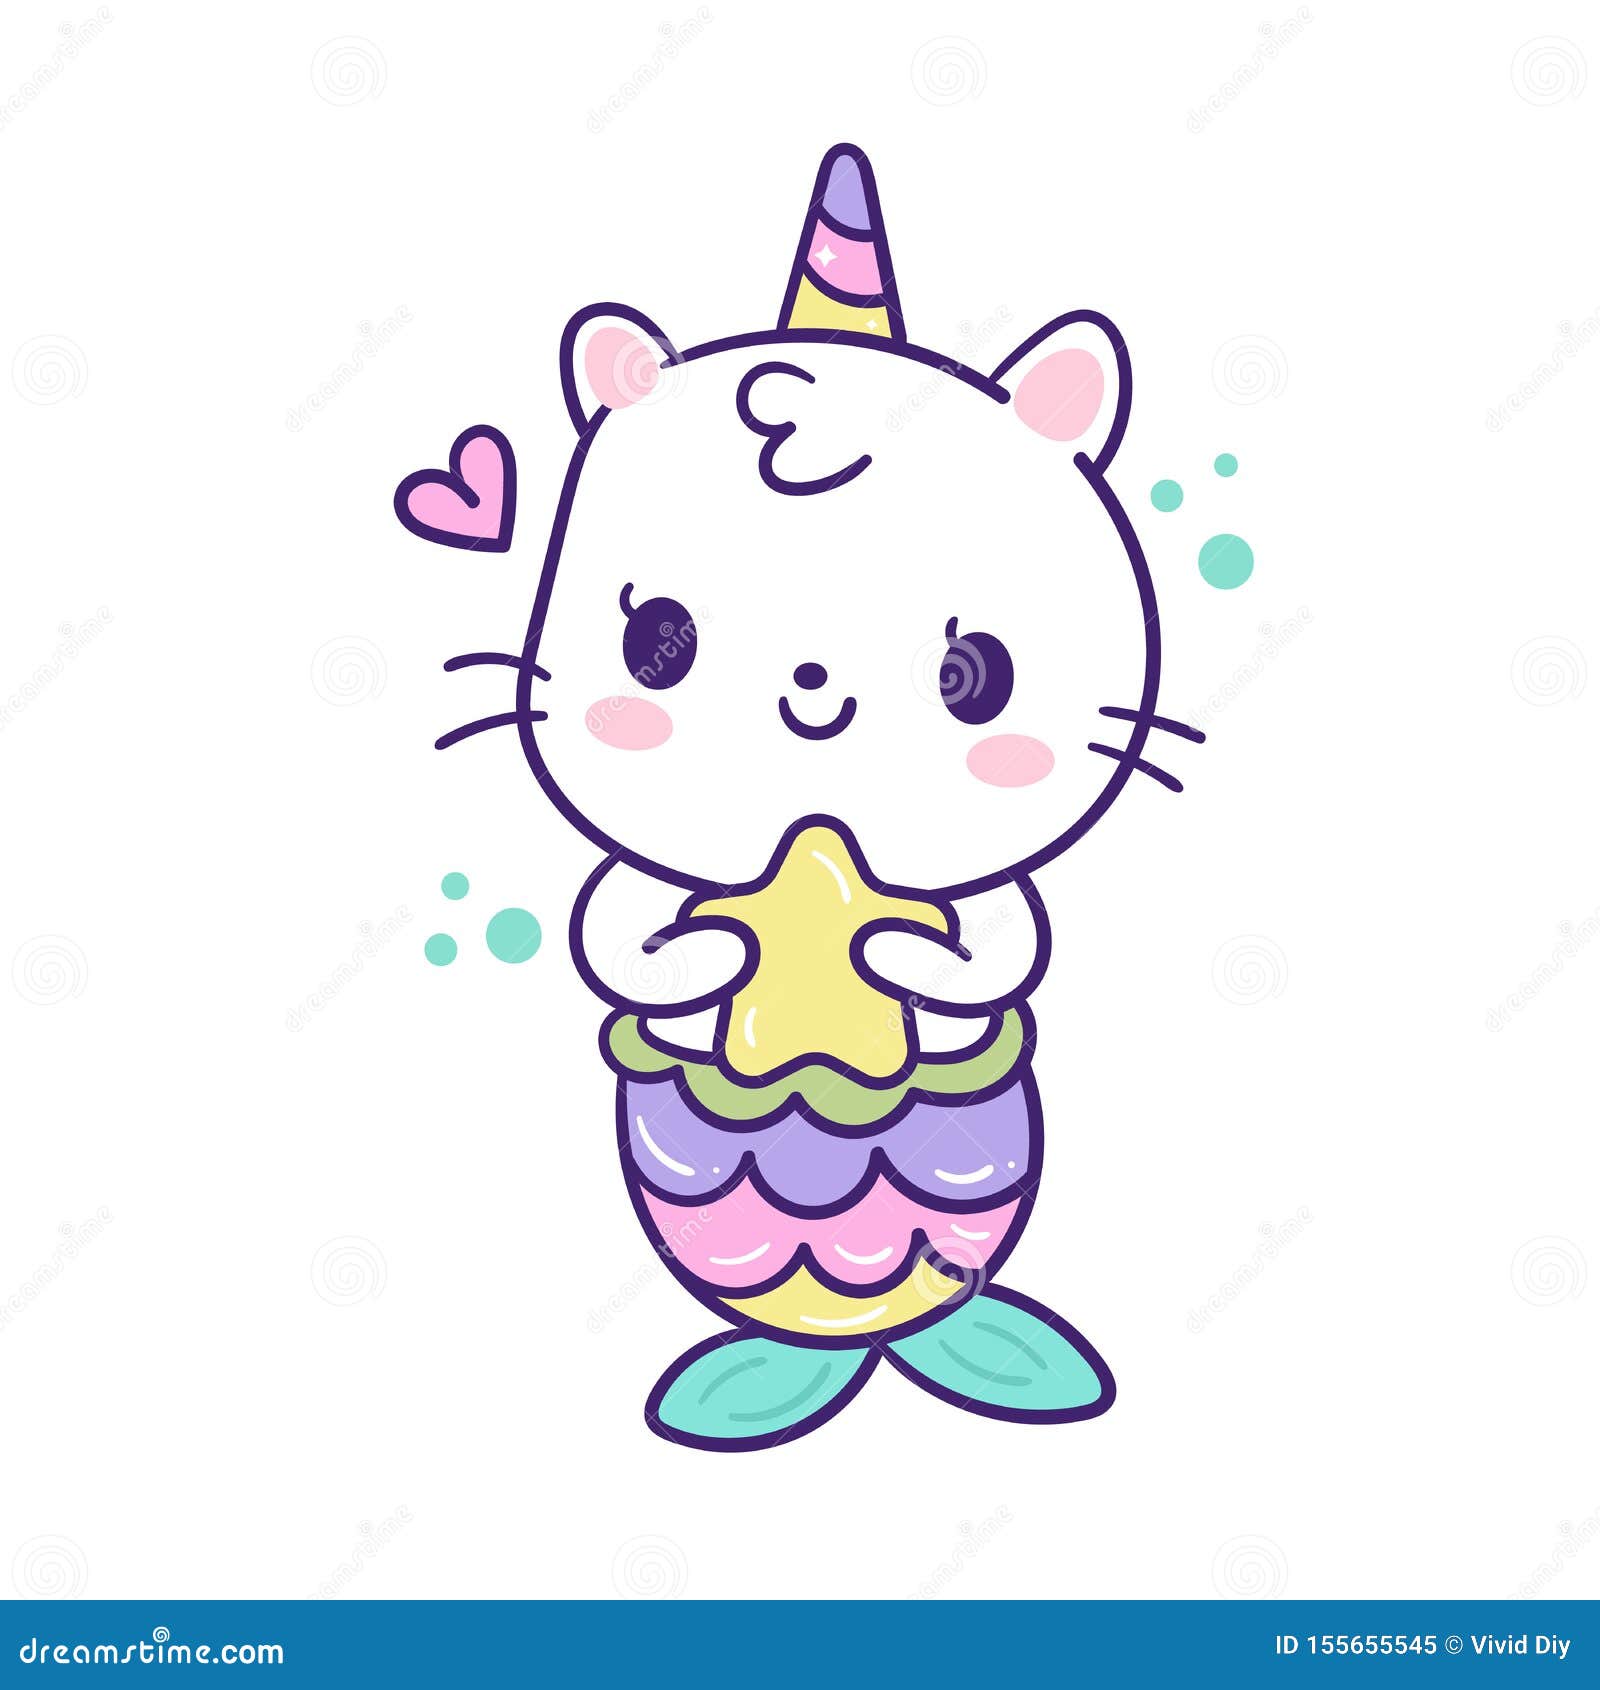 Illustrator of Cat Mermaid in Unicorn Vector Kawaii Animal with Pastel Color  Stock Vector - Illustration of card, cheerful: 155655545